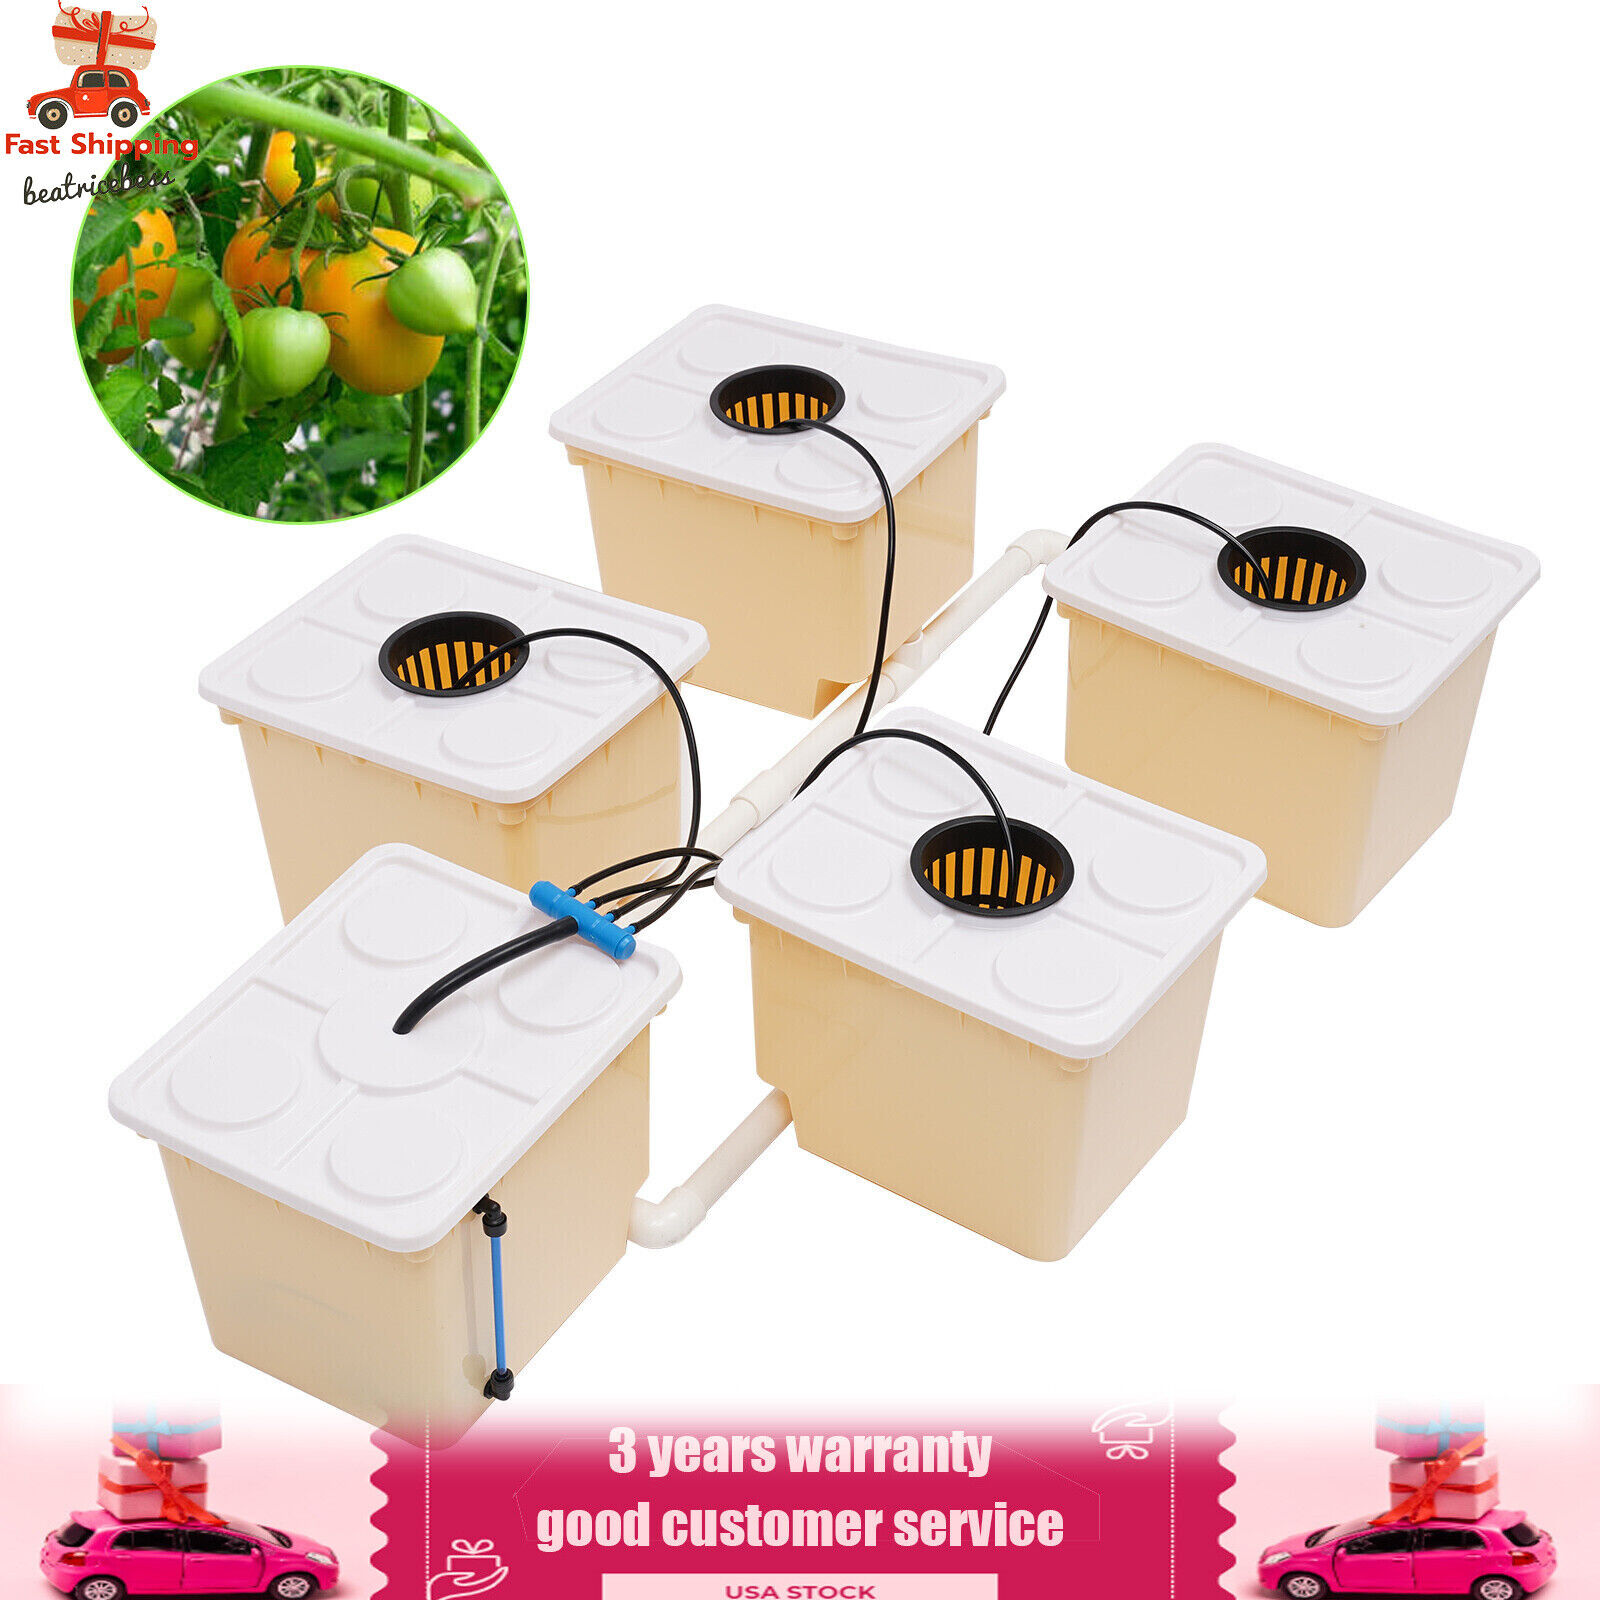 Hydroponic Deep Water Culture (DWC) & Buckets Drip Ring Grow System Kit Pp & Uv